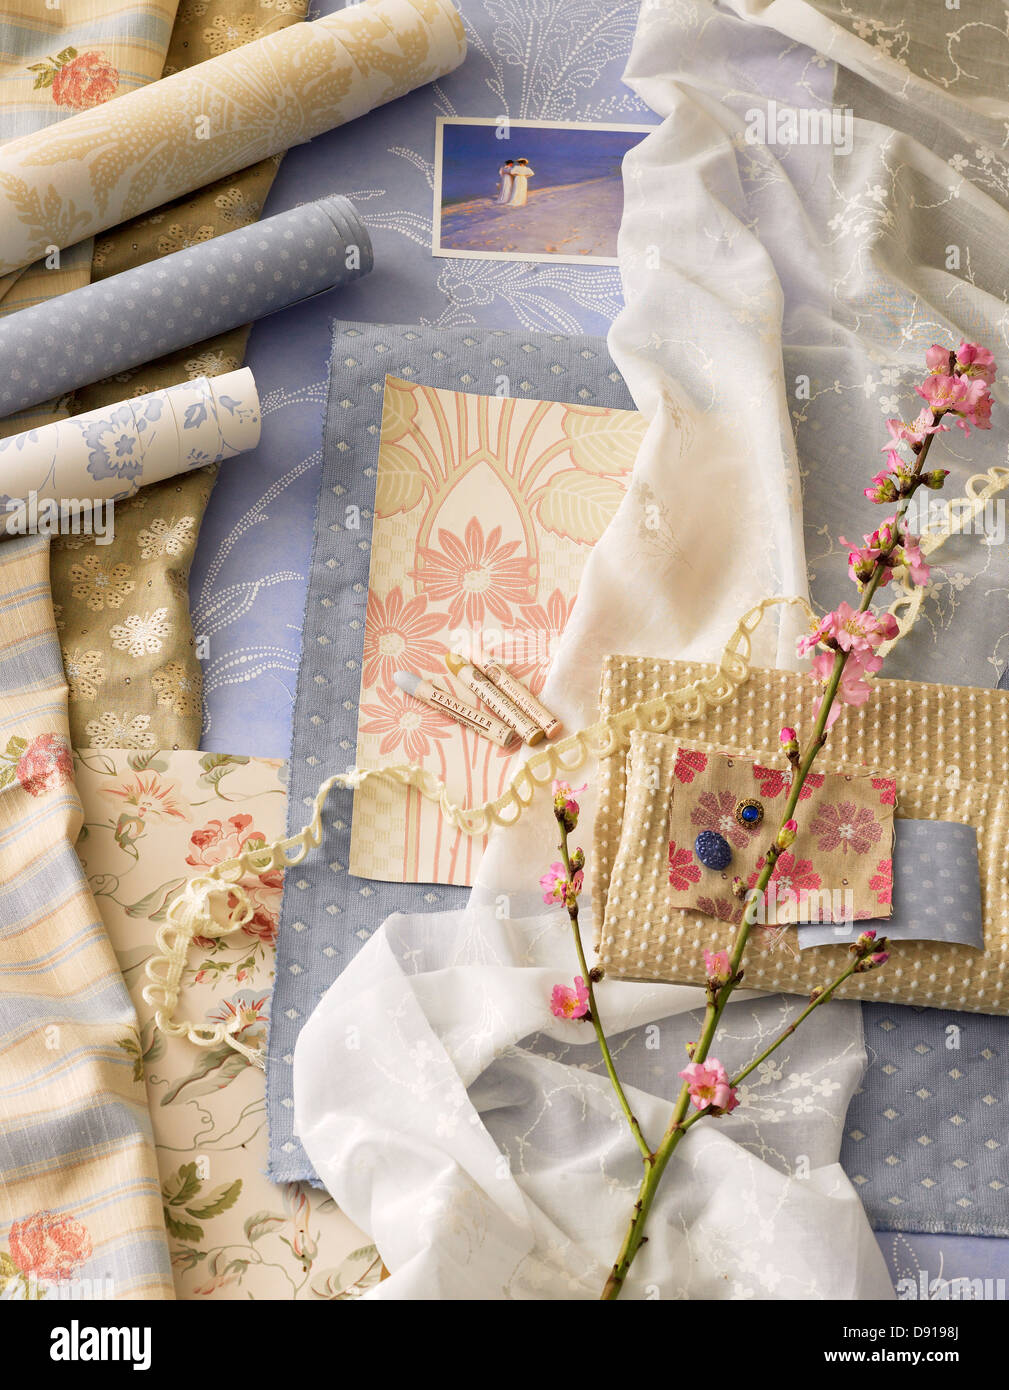 Textiles and wallpapers, Sweden. Stock Photo